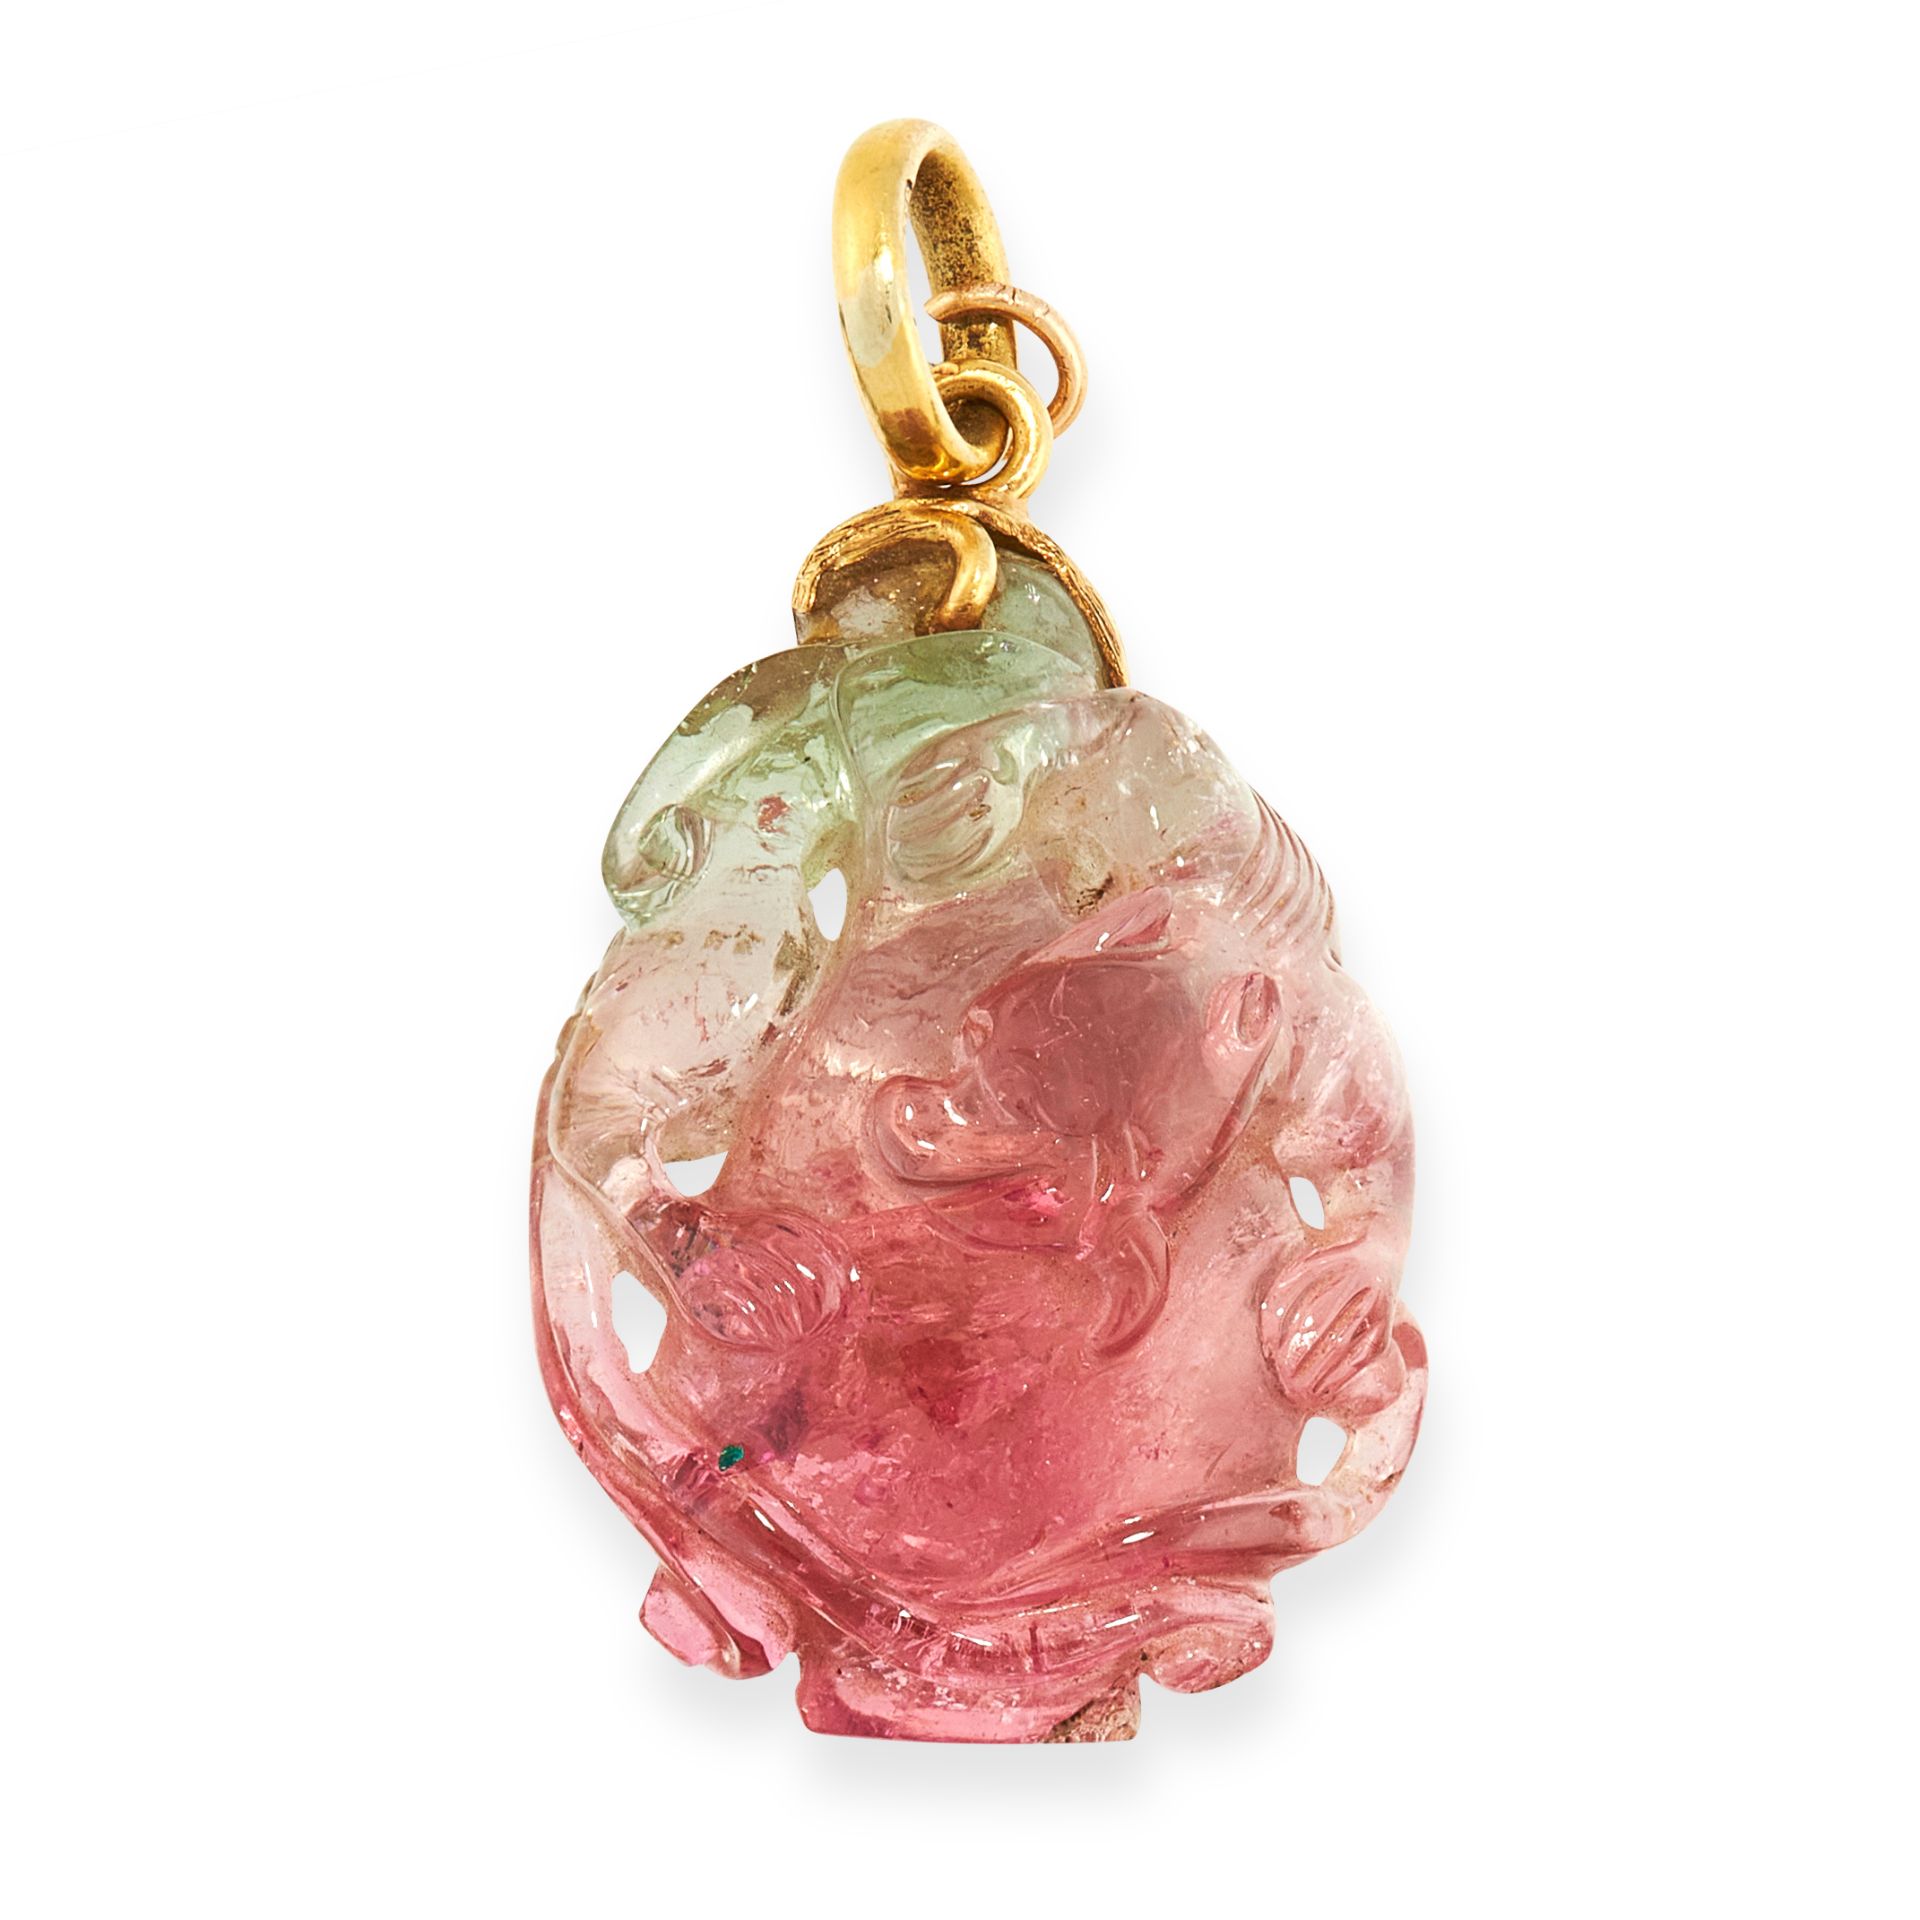 A CHINESE CARVED WATERMELON TOURMALINE PENDANT in 18ct yellow gold, the body formed of a piece of